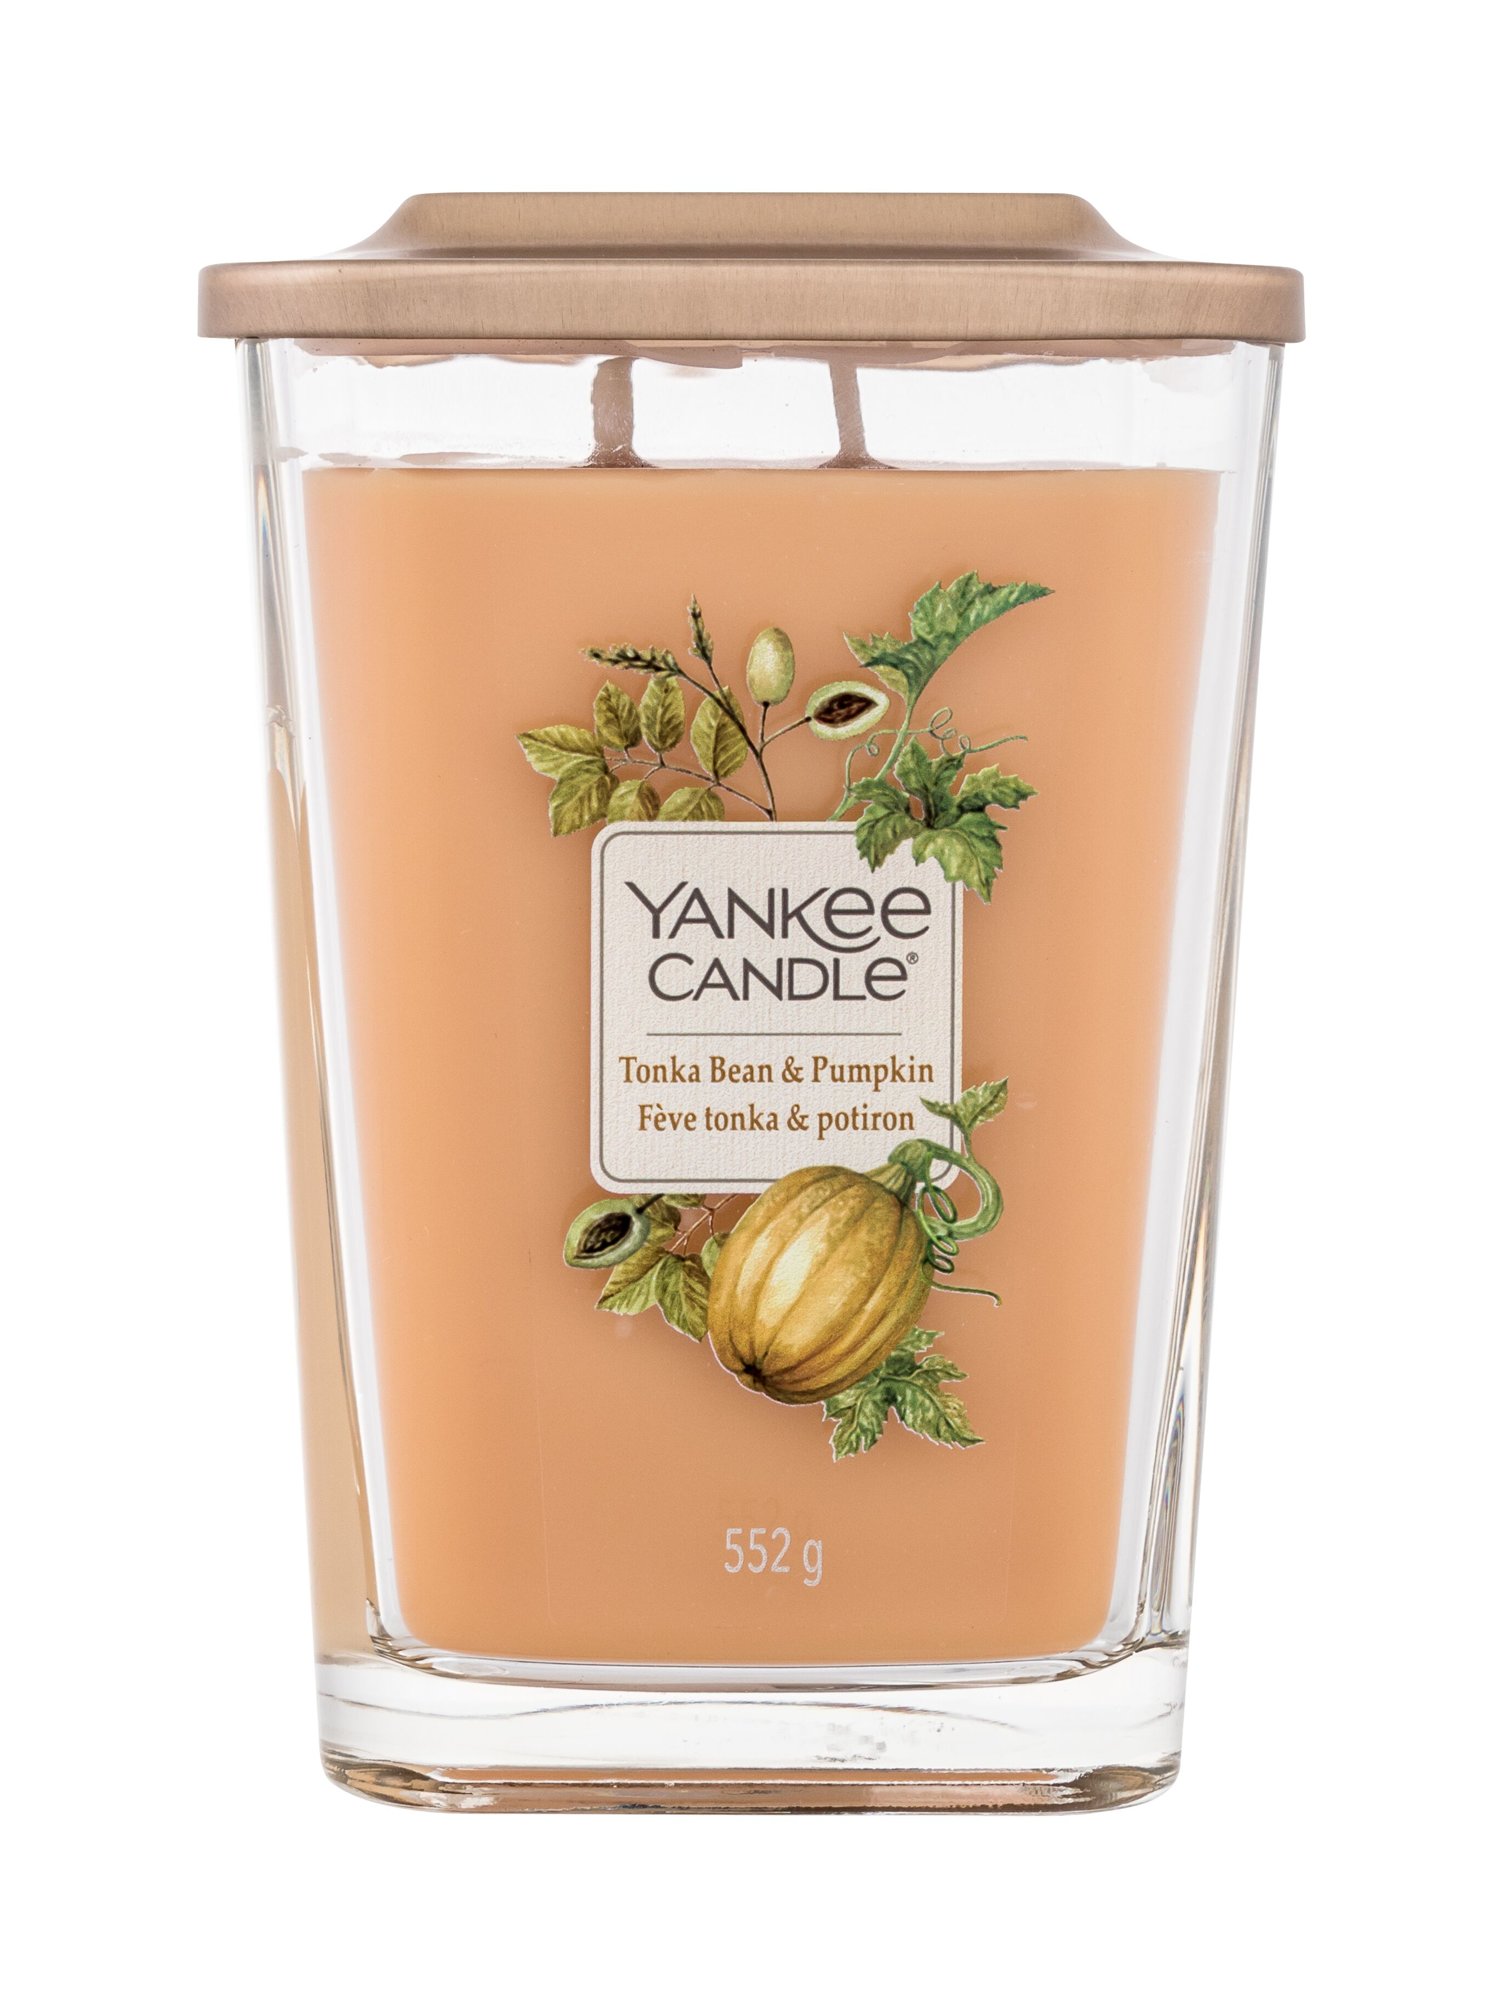 Yankee Candle Elevation Collection Tonka Bean & Pumpkin 552g Kvepalai Unisex Scented Candle